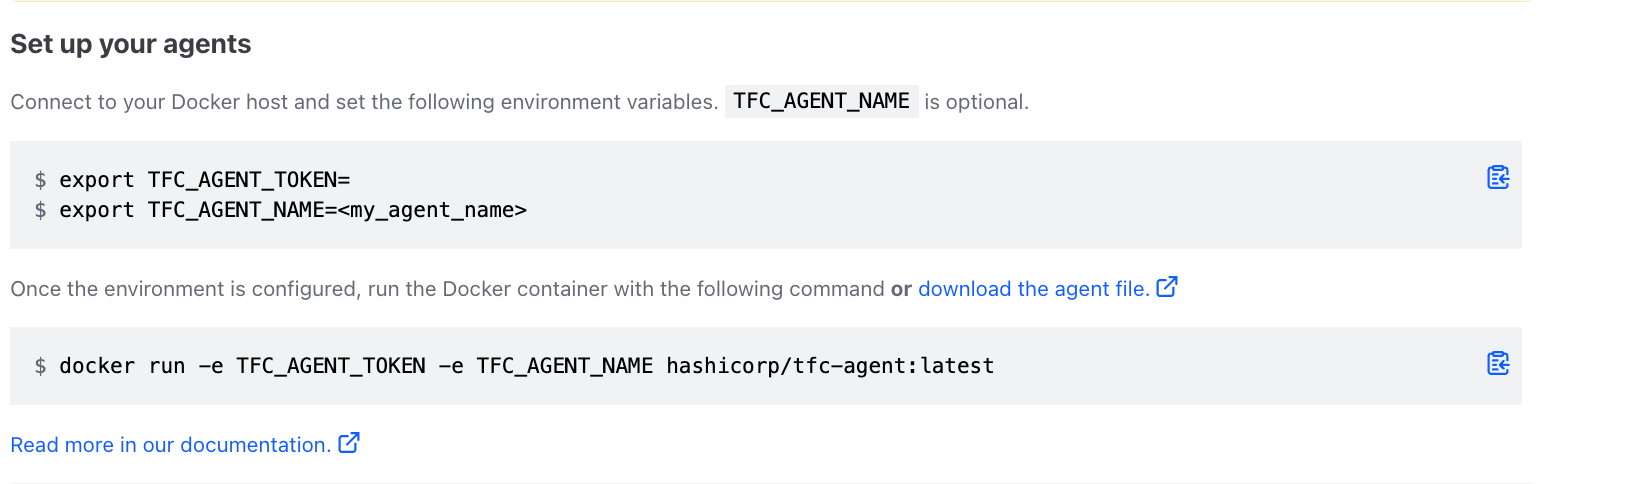 setting up tfc agents